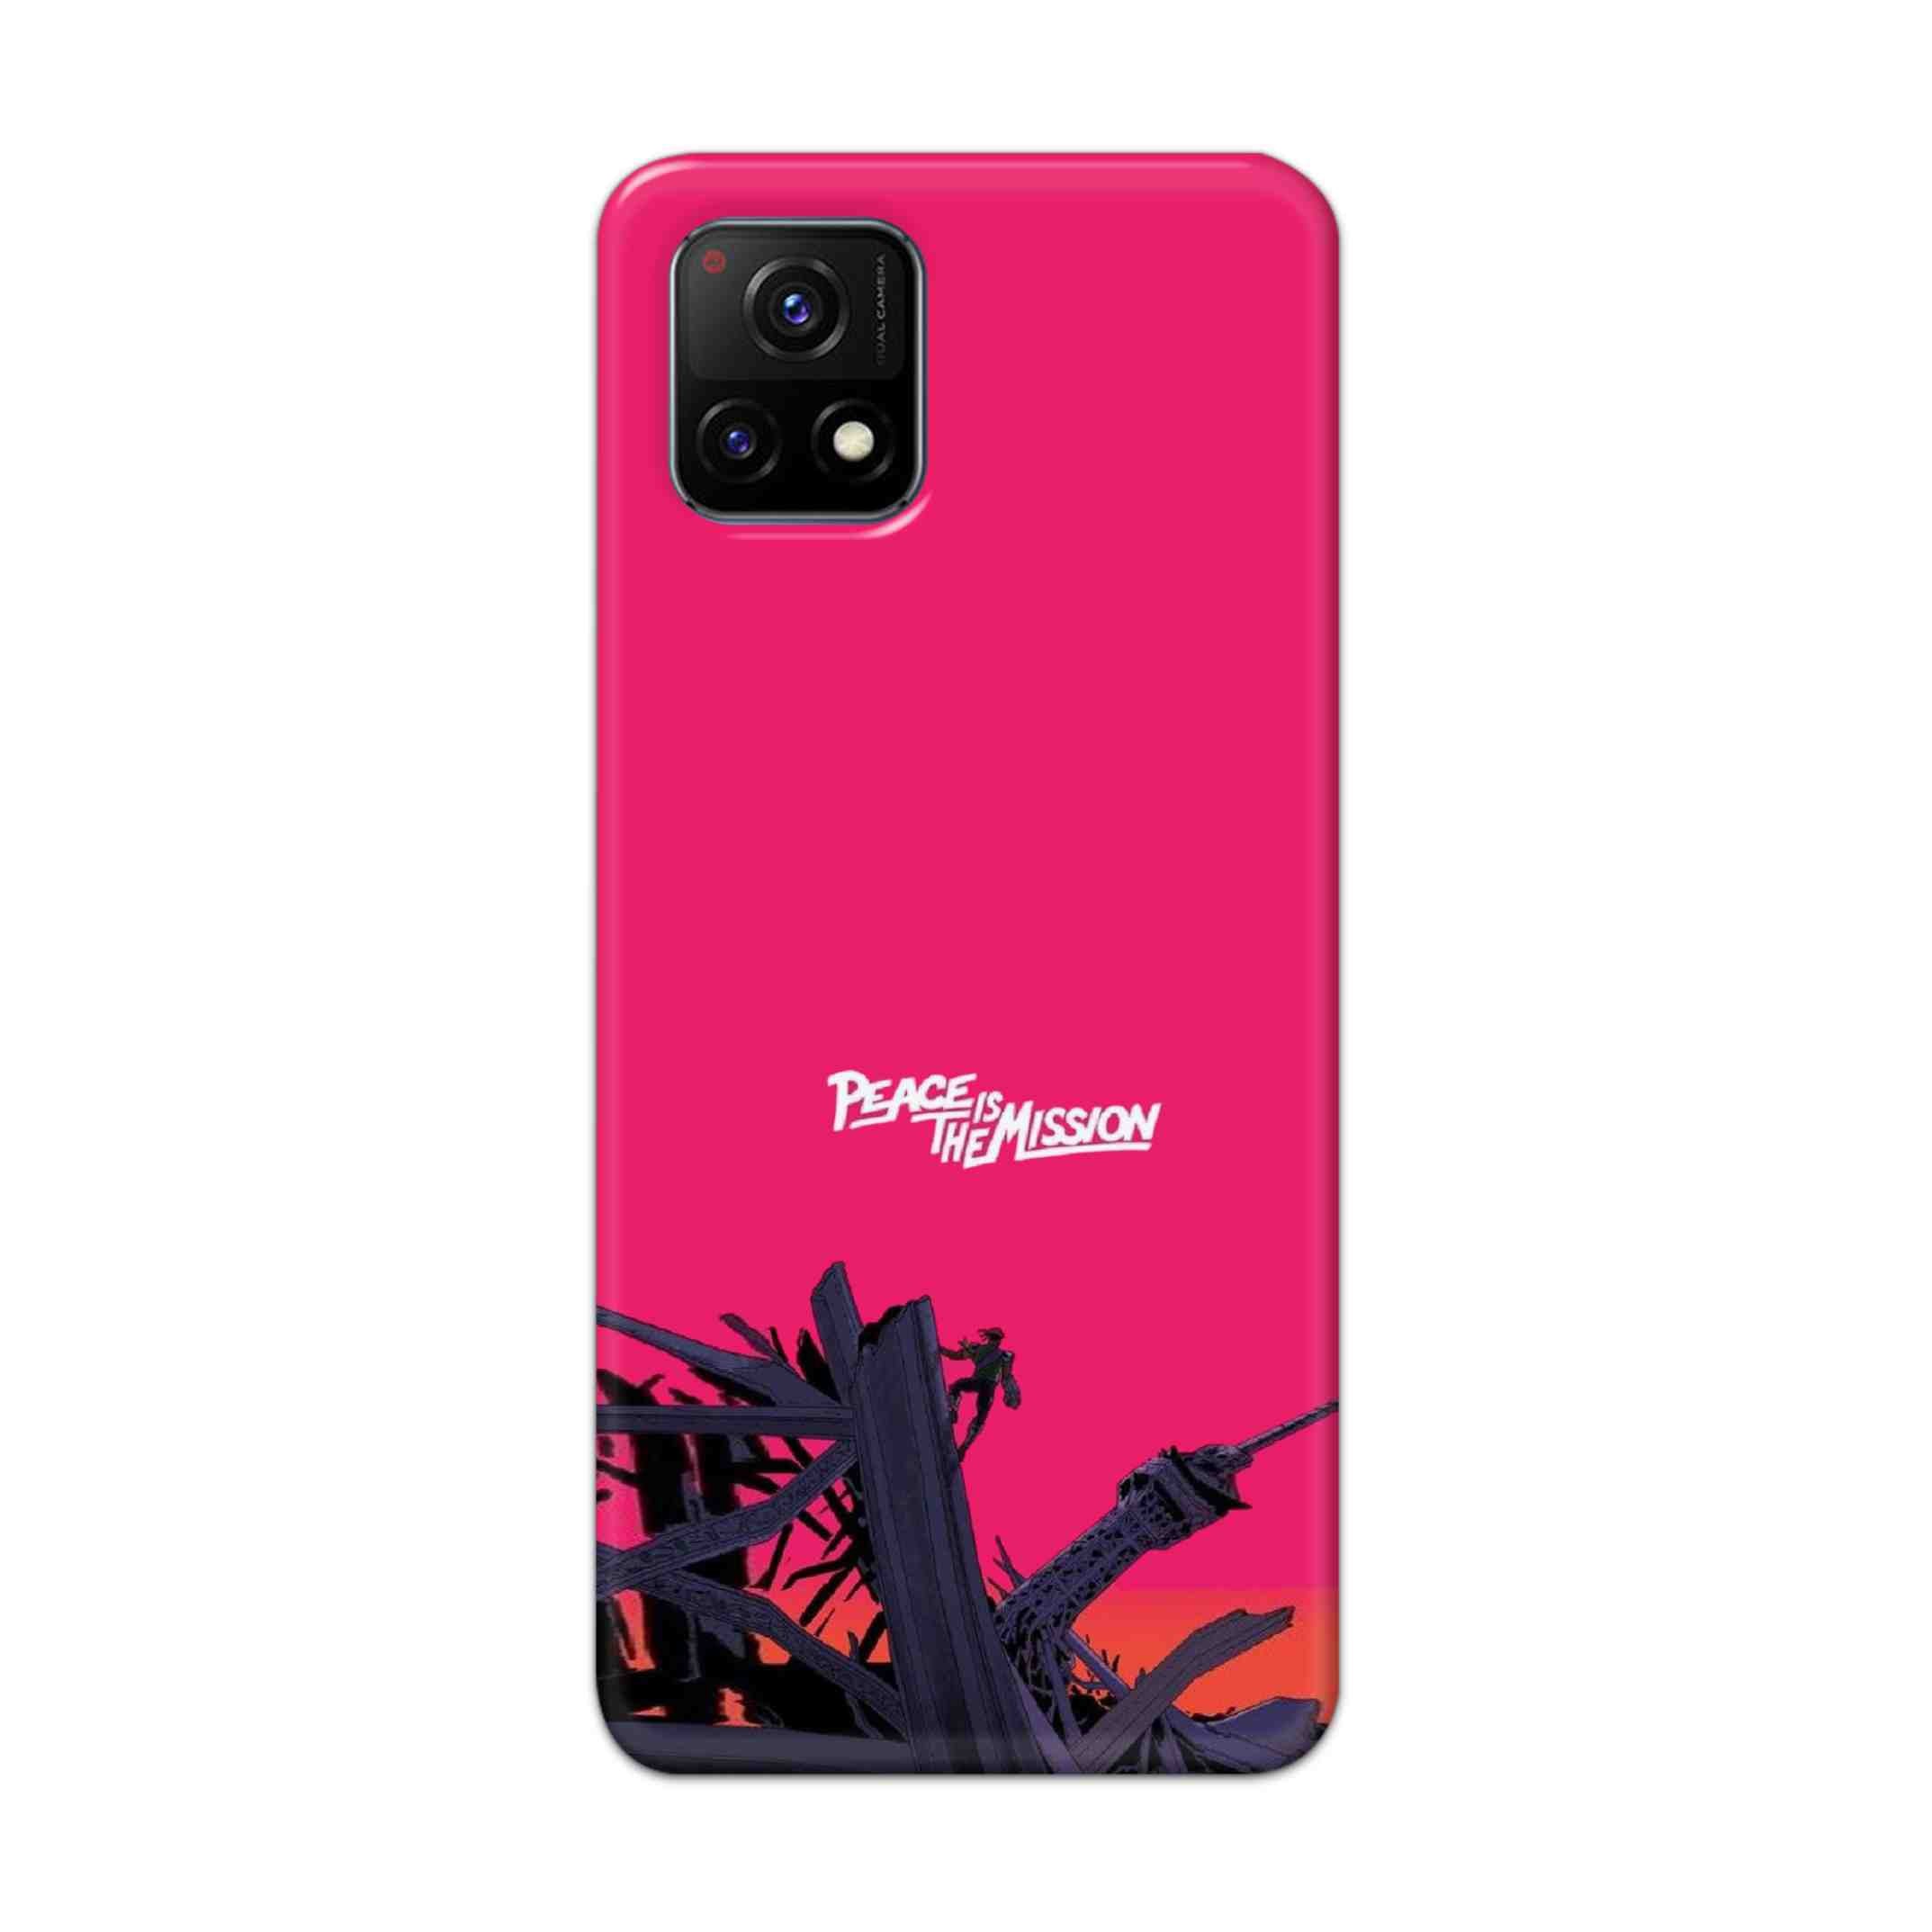 Buy Peace Is The Mission Hard Back Mobile Phone Case Cover For Vivo Y72 5G Online